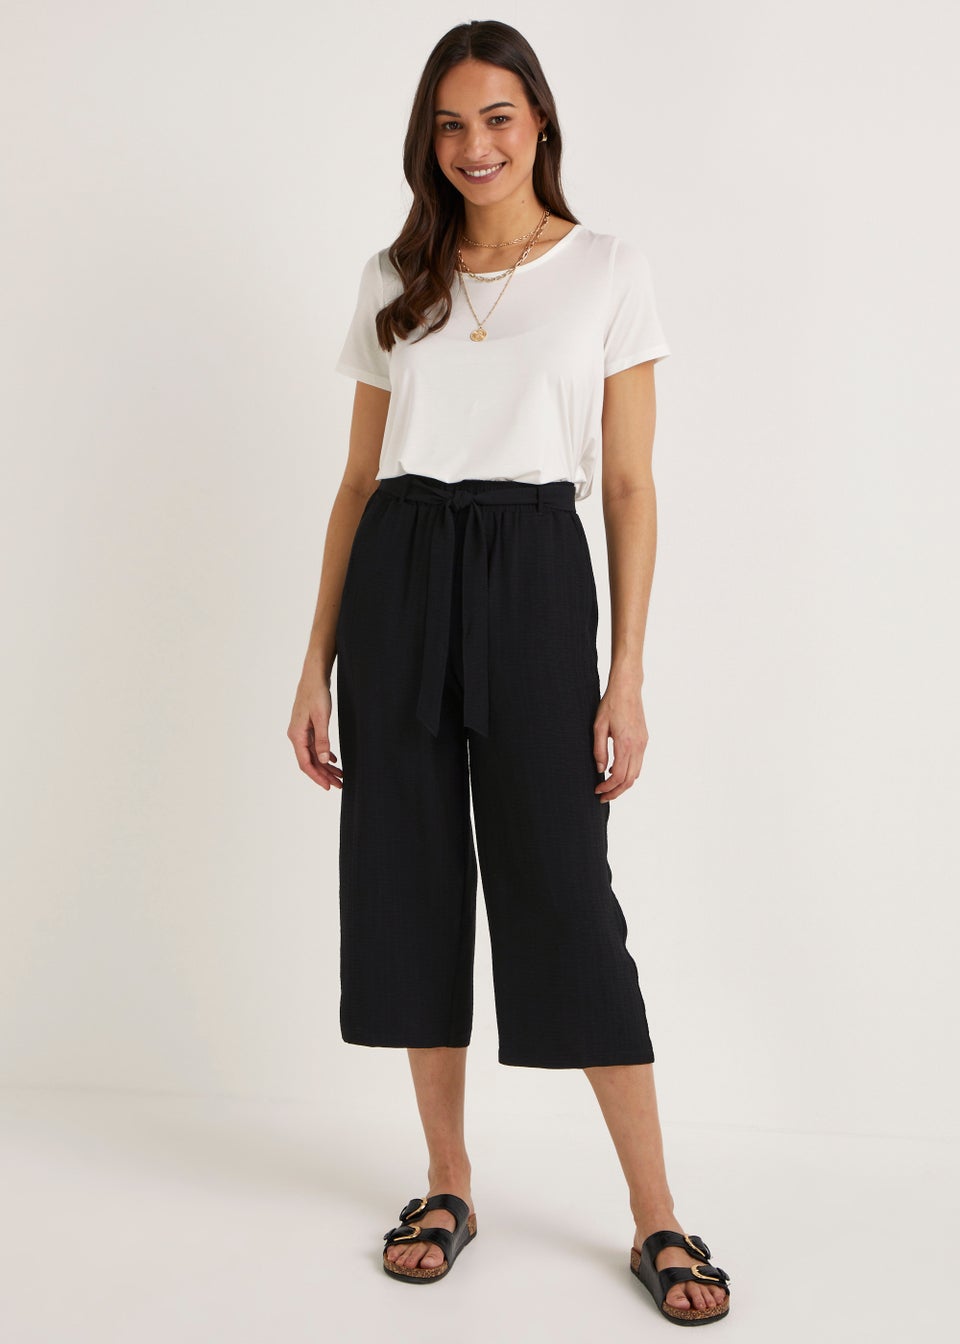 Black Cropped Trousers